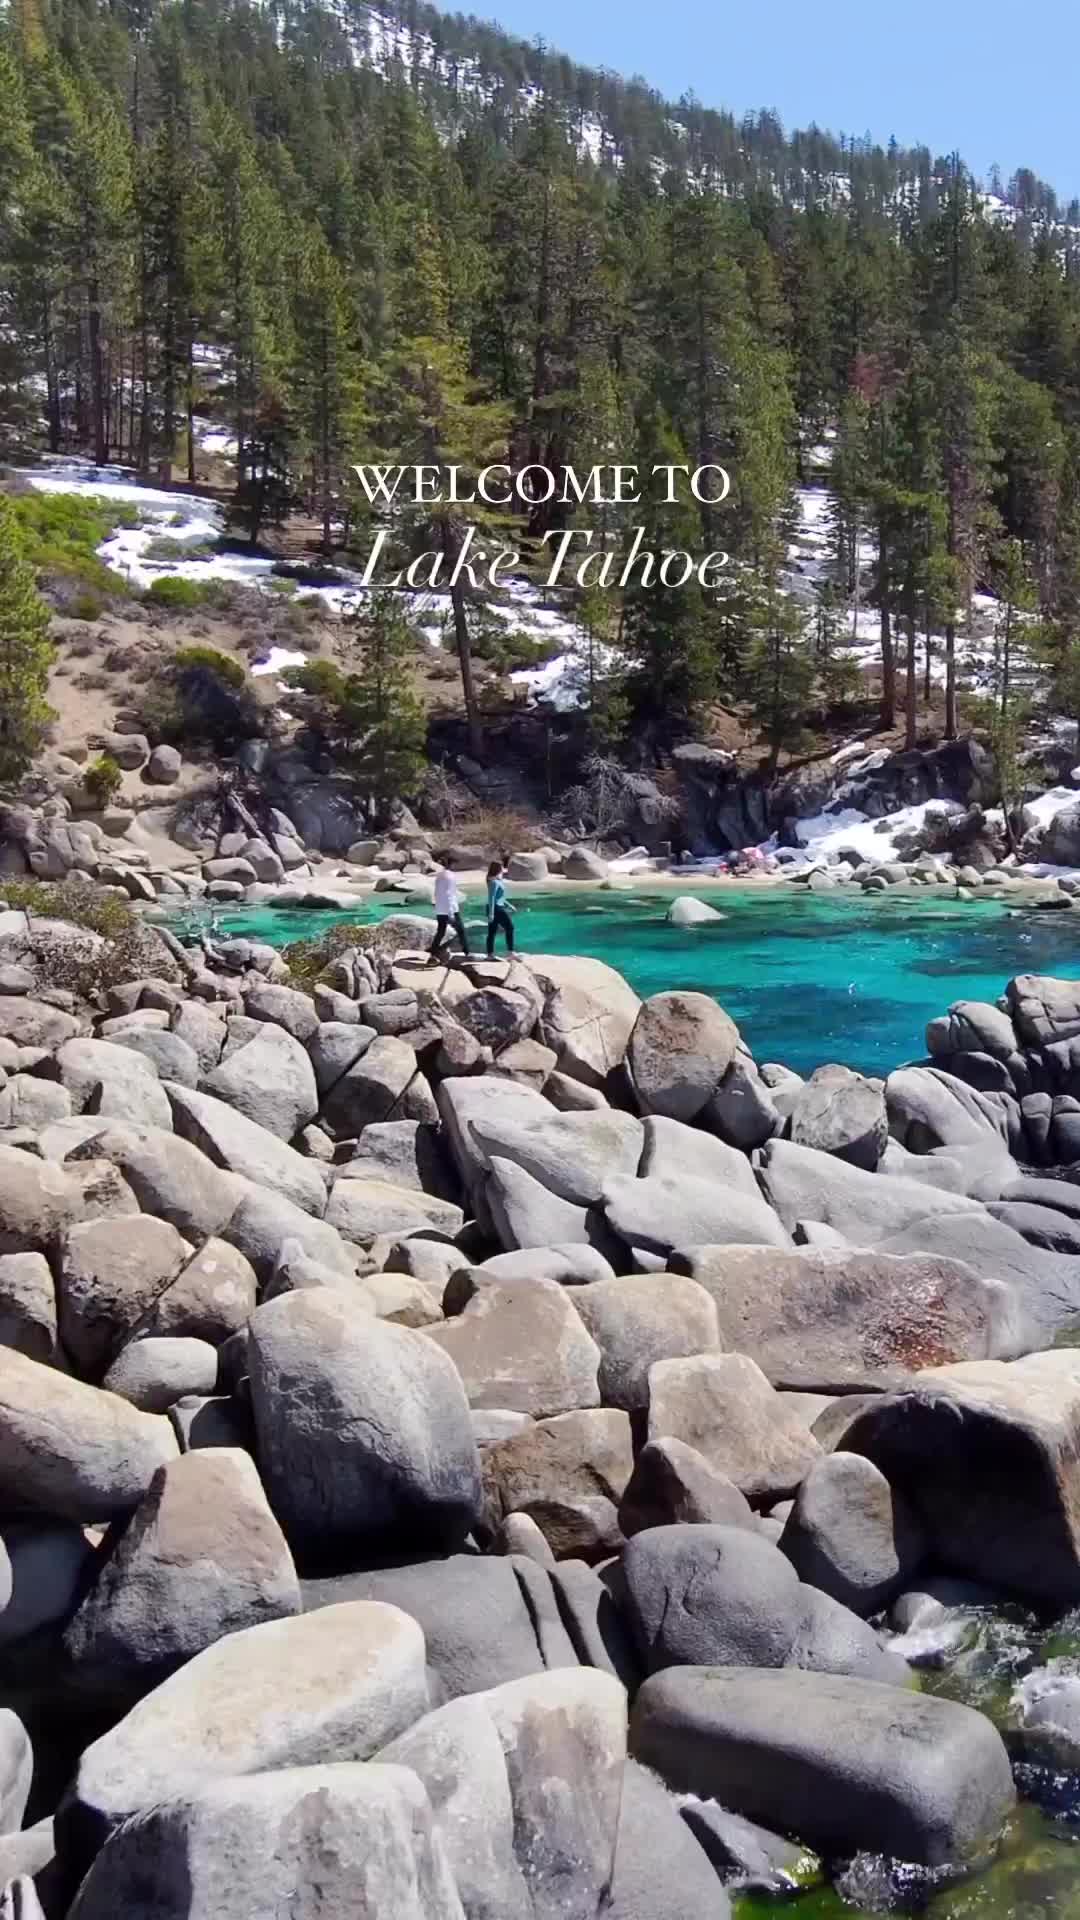 Crystal Clear Waters of Lake Tahoe | Spot the Naked Man!